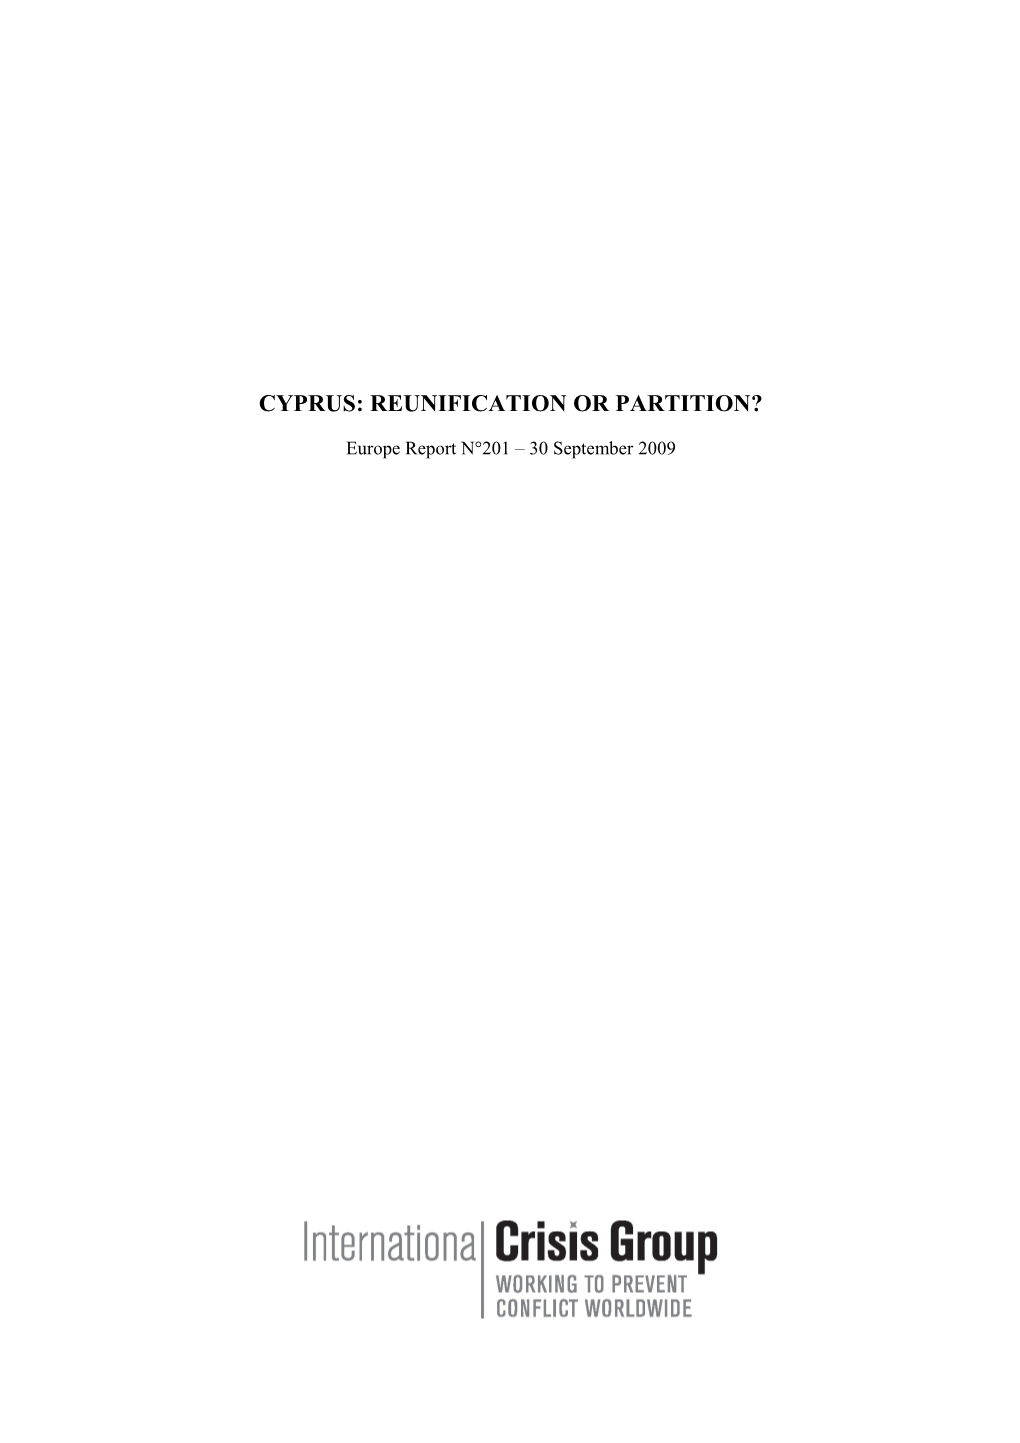 Cyprus: Reunification Or Partition?